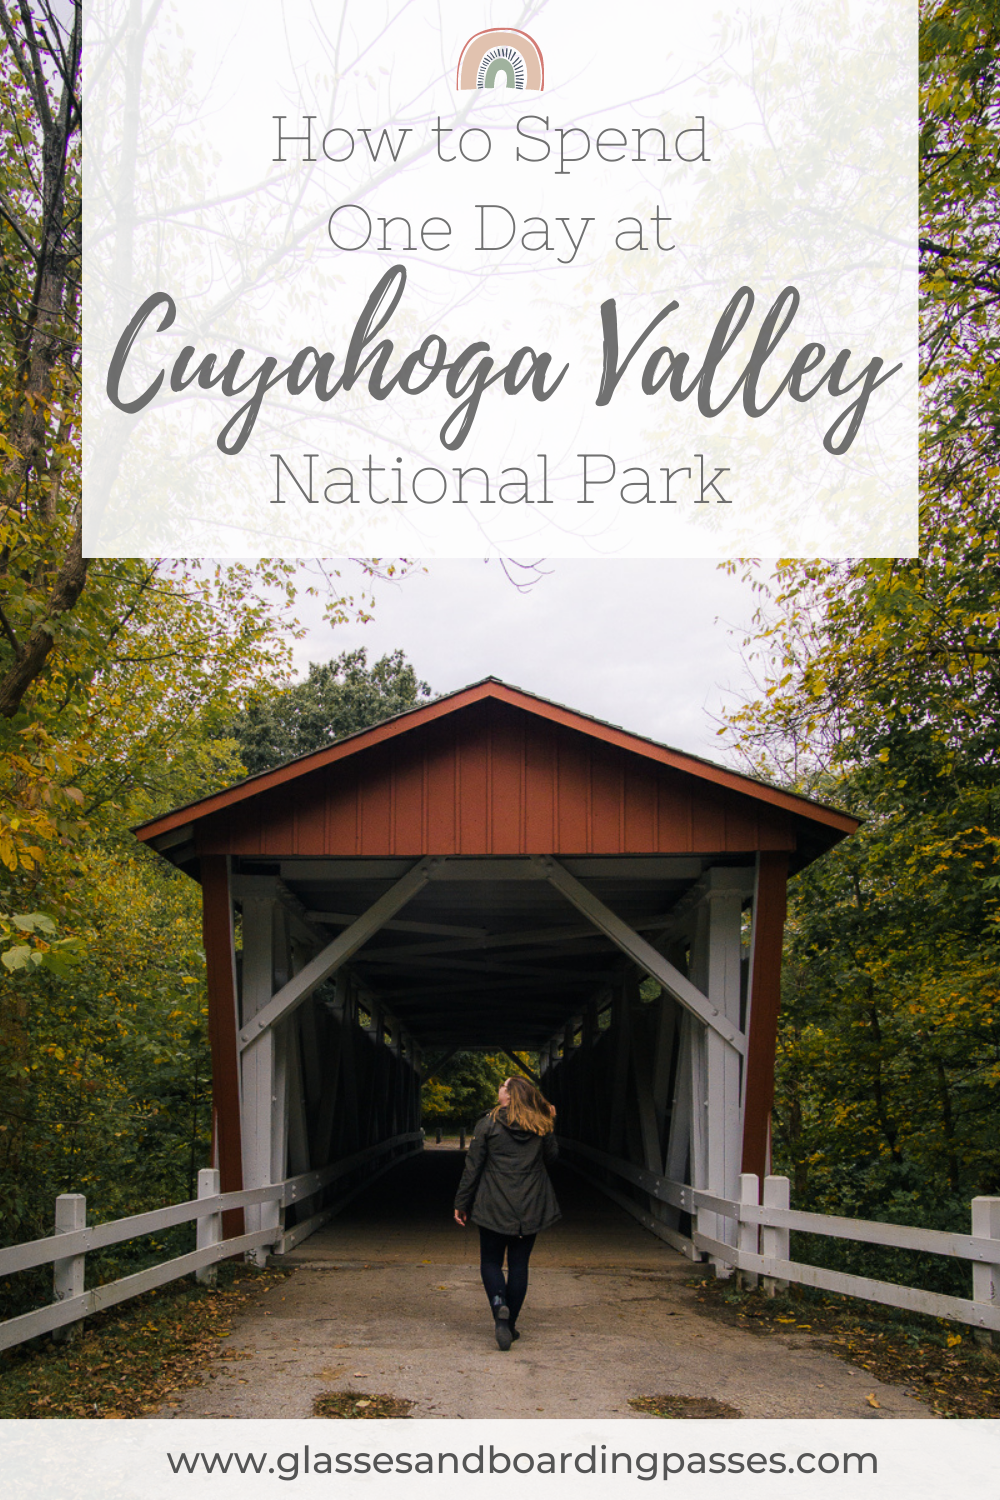 One Day at Cuyahoga Valley National Park